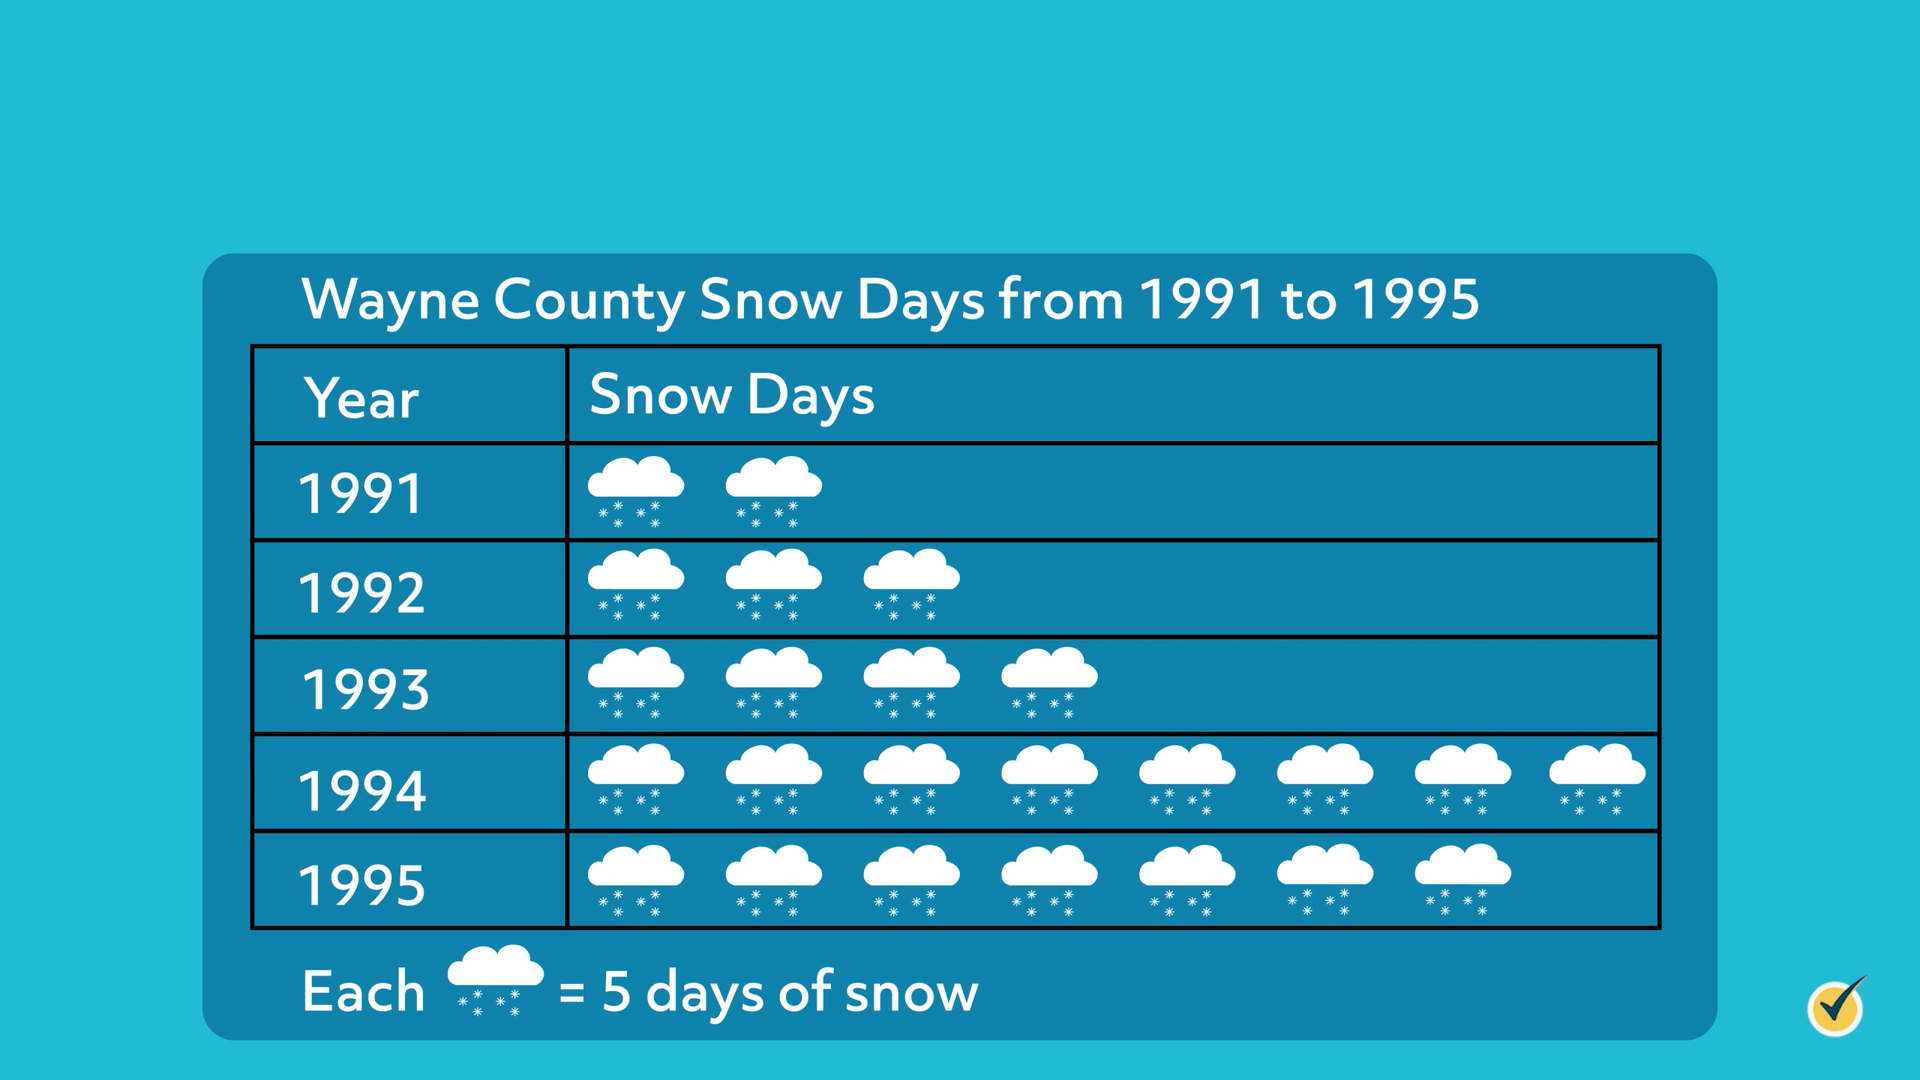 Pictograph showing the Wayne County Snow Days from 1991 to 1995. 1991 has 2, 1992 has 3, 1993 has 4, 1994 has 8, and 1995 has 7.